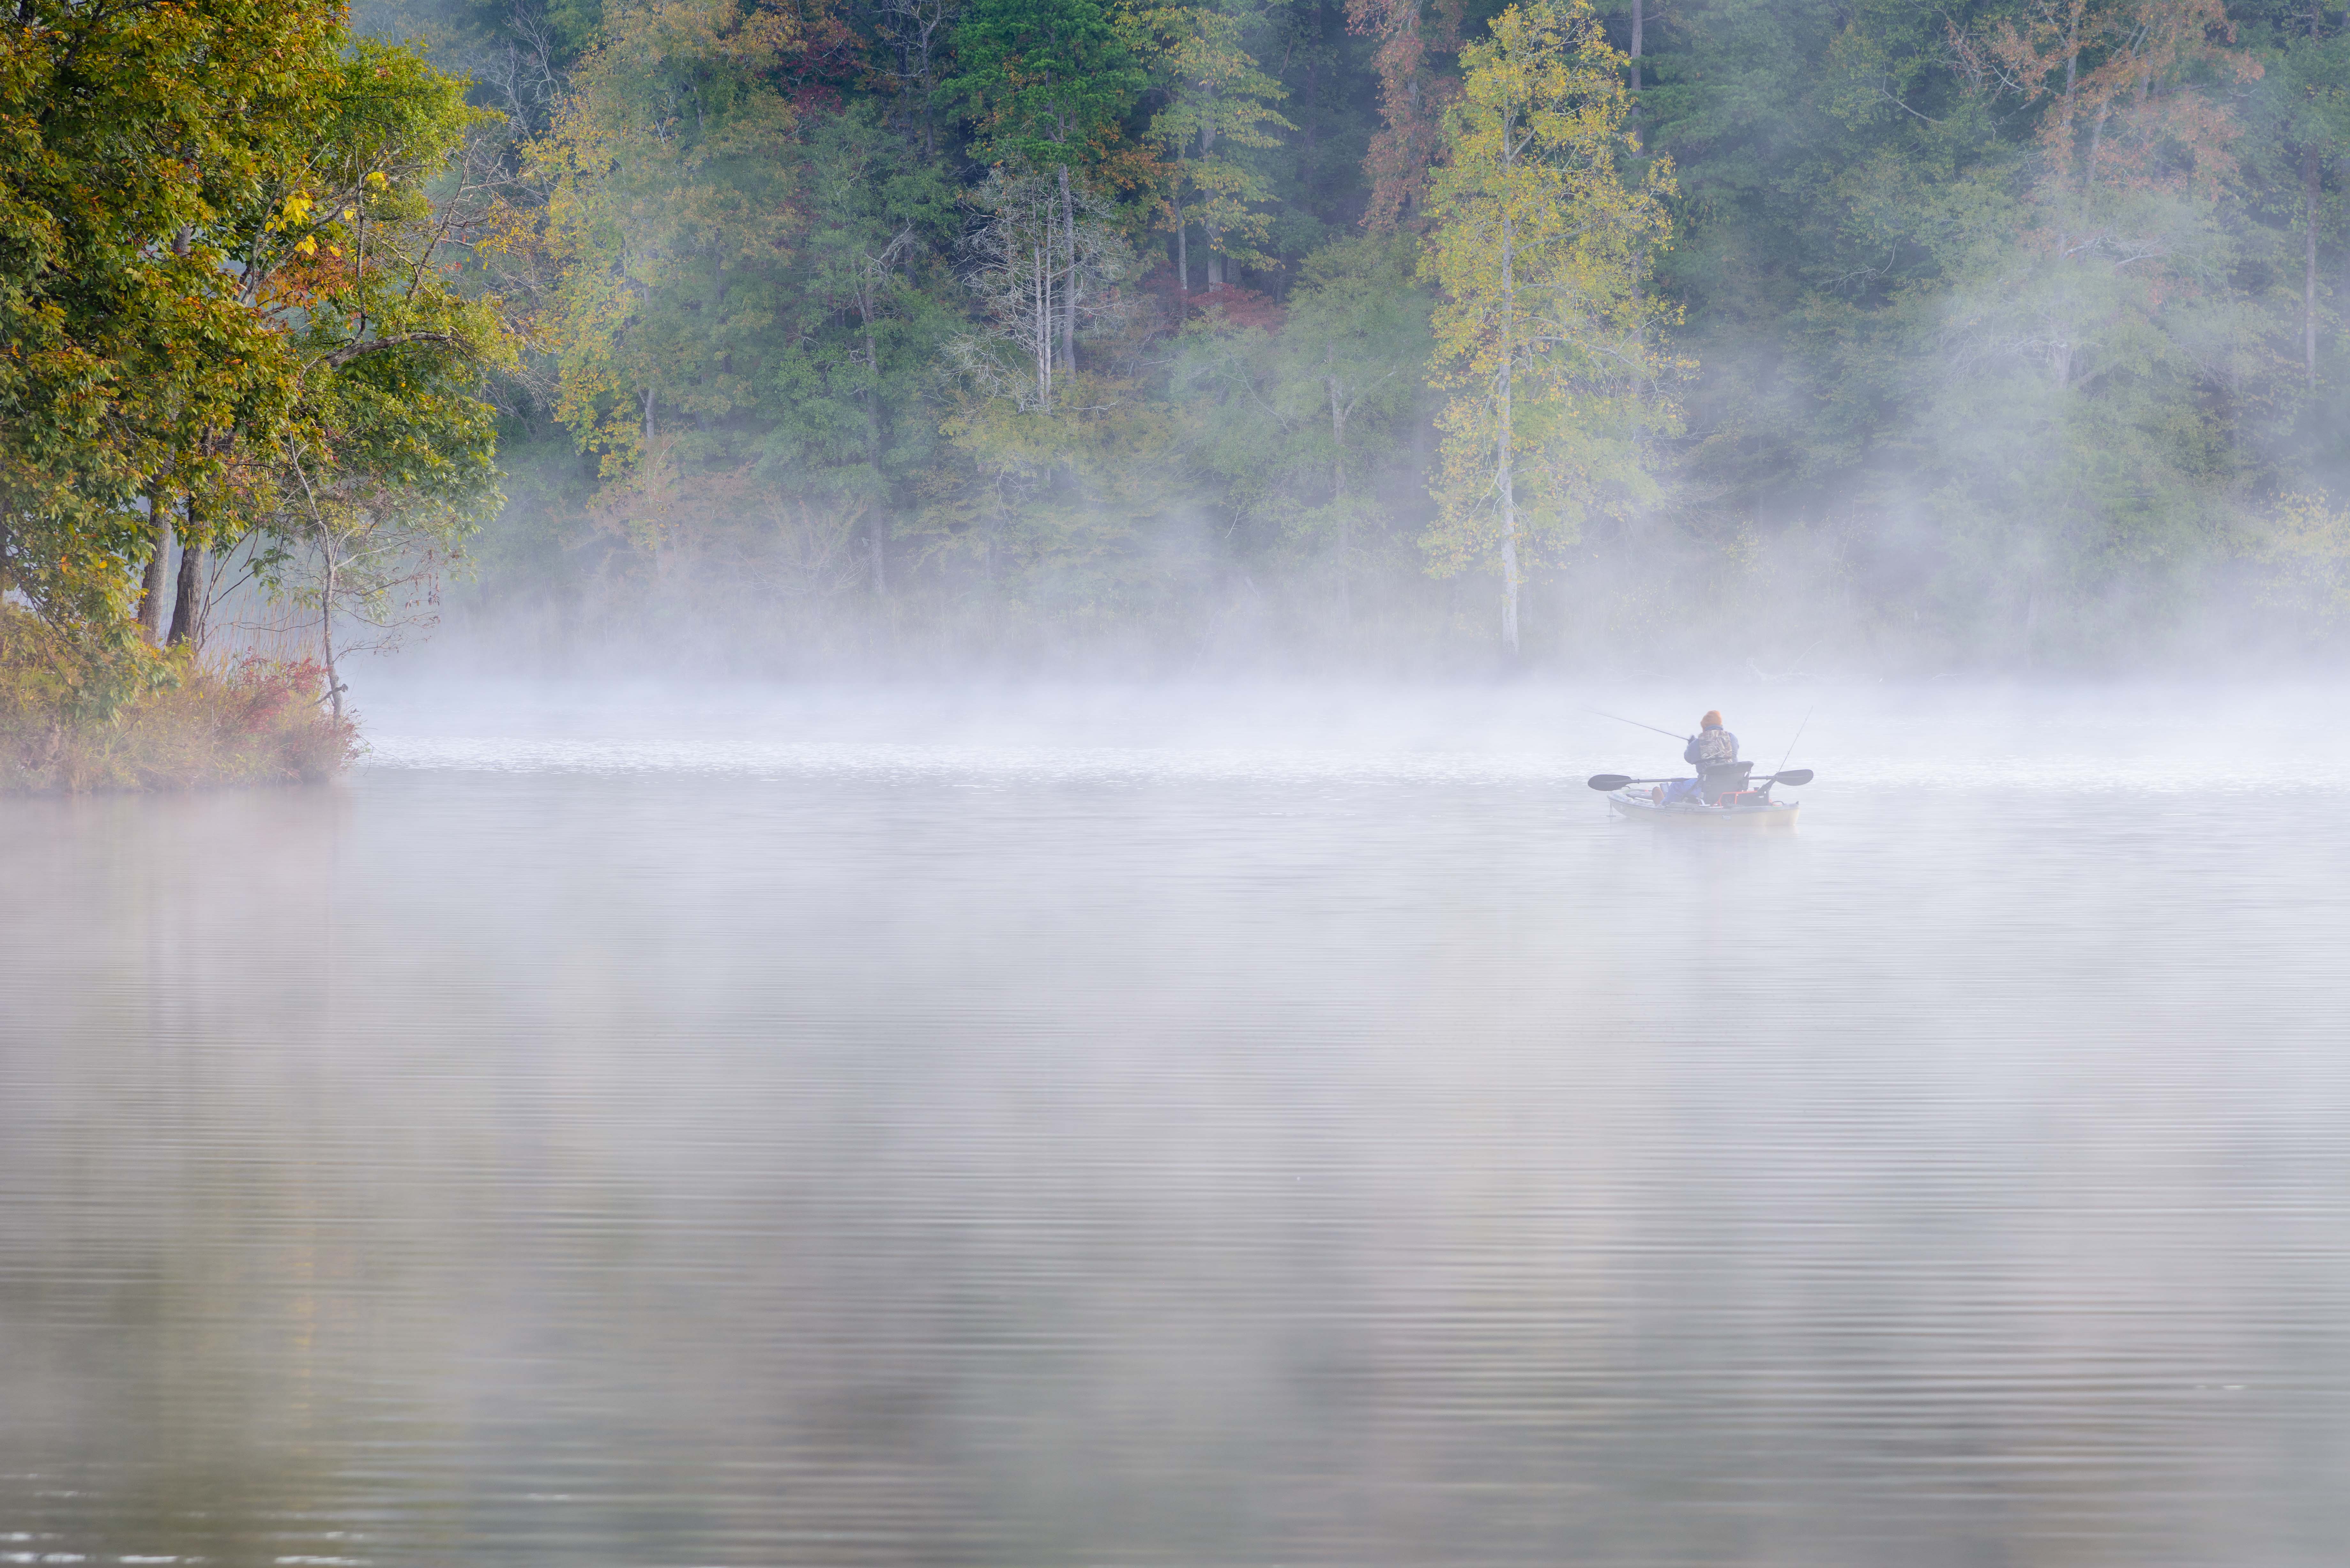 The Fisherman, Photograph by Philip Culbertson